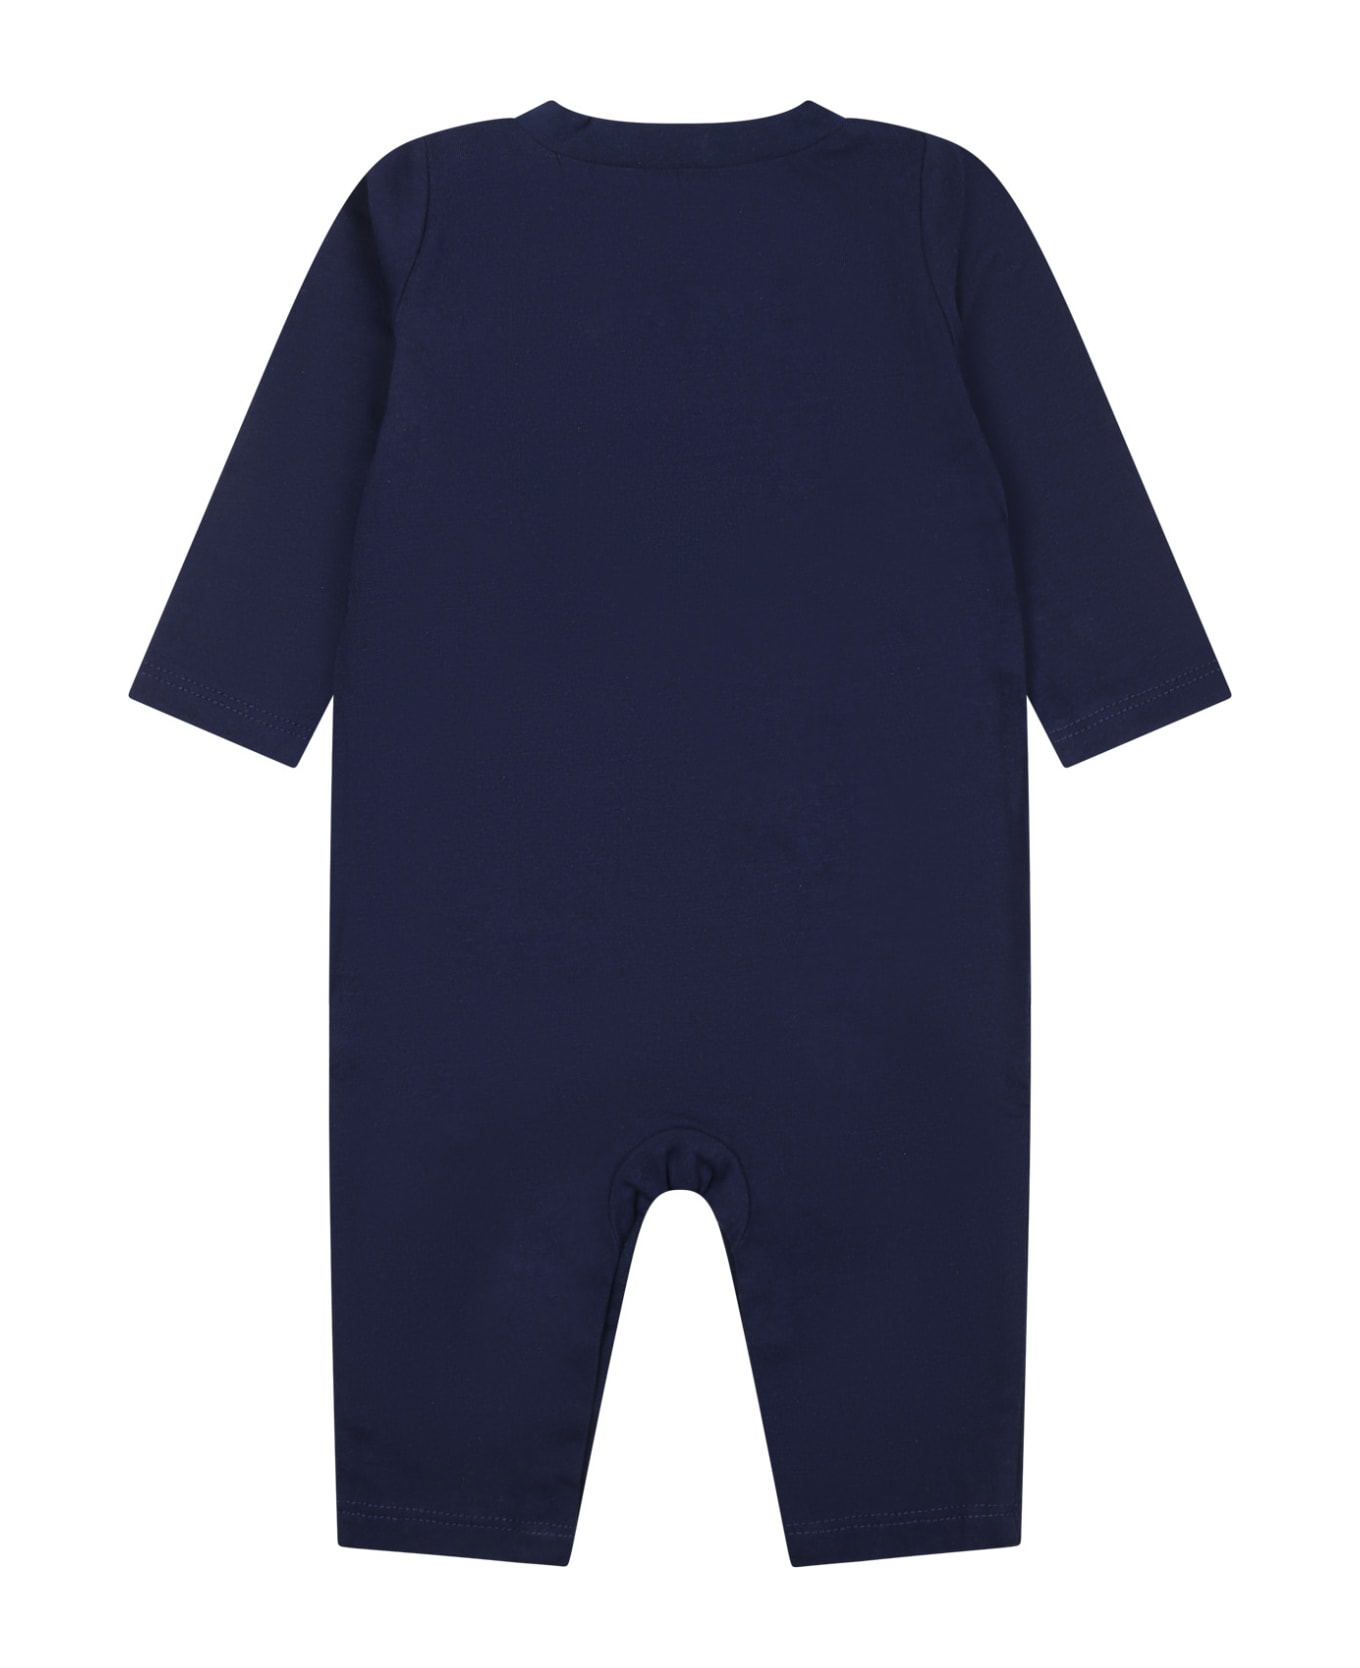 Nike Blue Babygrow For Baby Boy With Swoosh - Blue